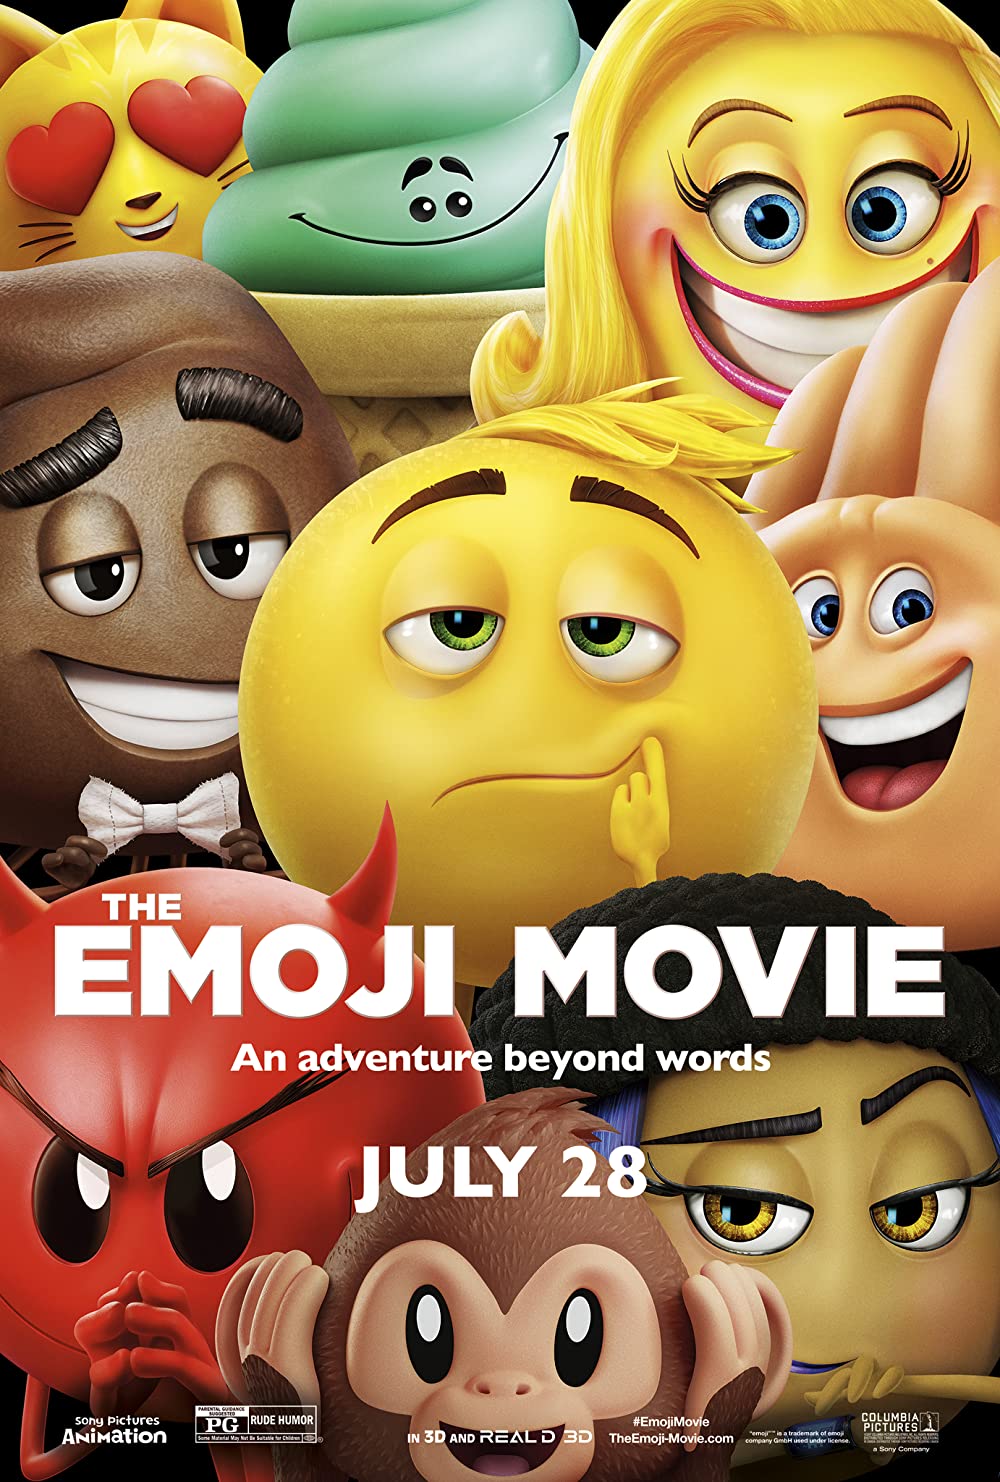 emoji movie poster - The Emoji Movie An adventure beyond words July 28 Mo Harta Warance Columbia Sony Pictures Animation Pg Rude Humor In 3D And Reald 3D The EmojiMovie.com cermany content turns a trademark of om San Matar Sutter Sony Company